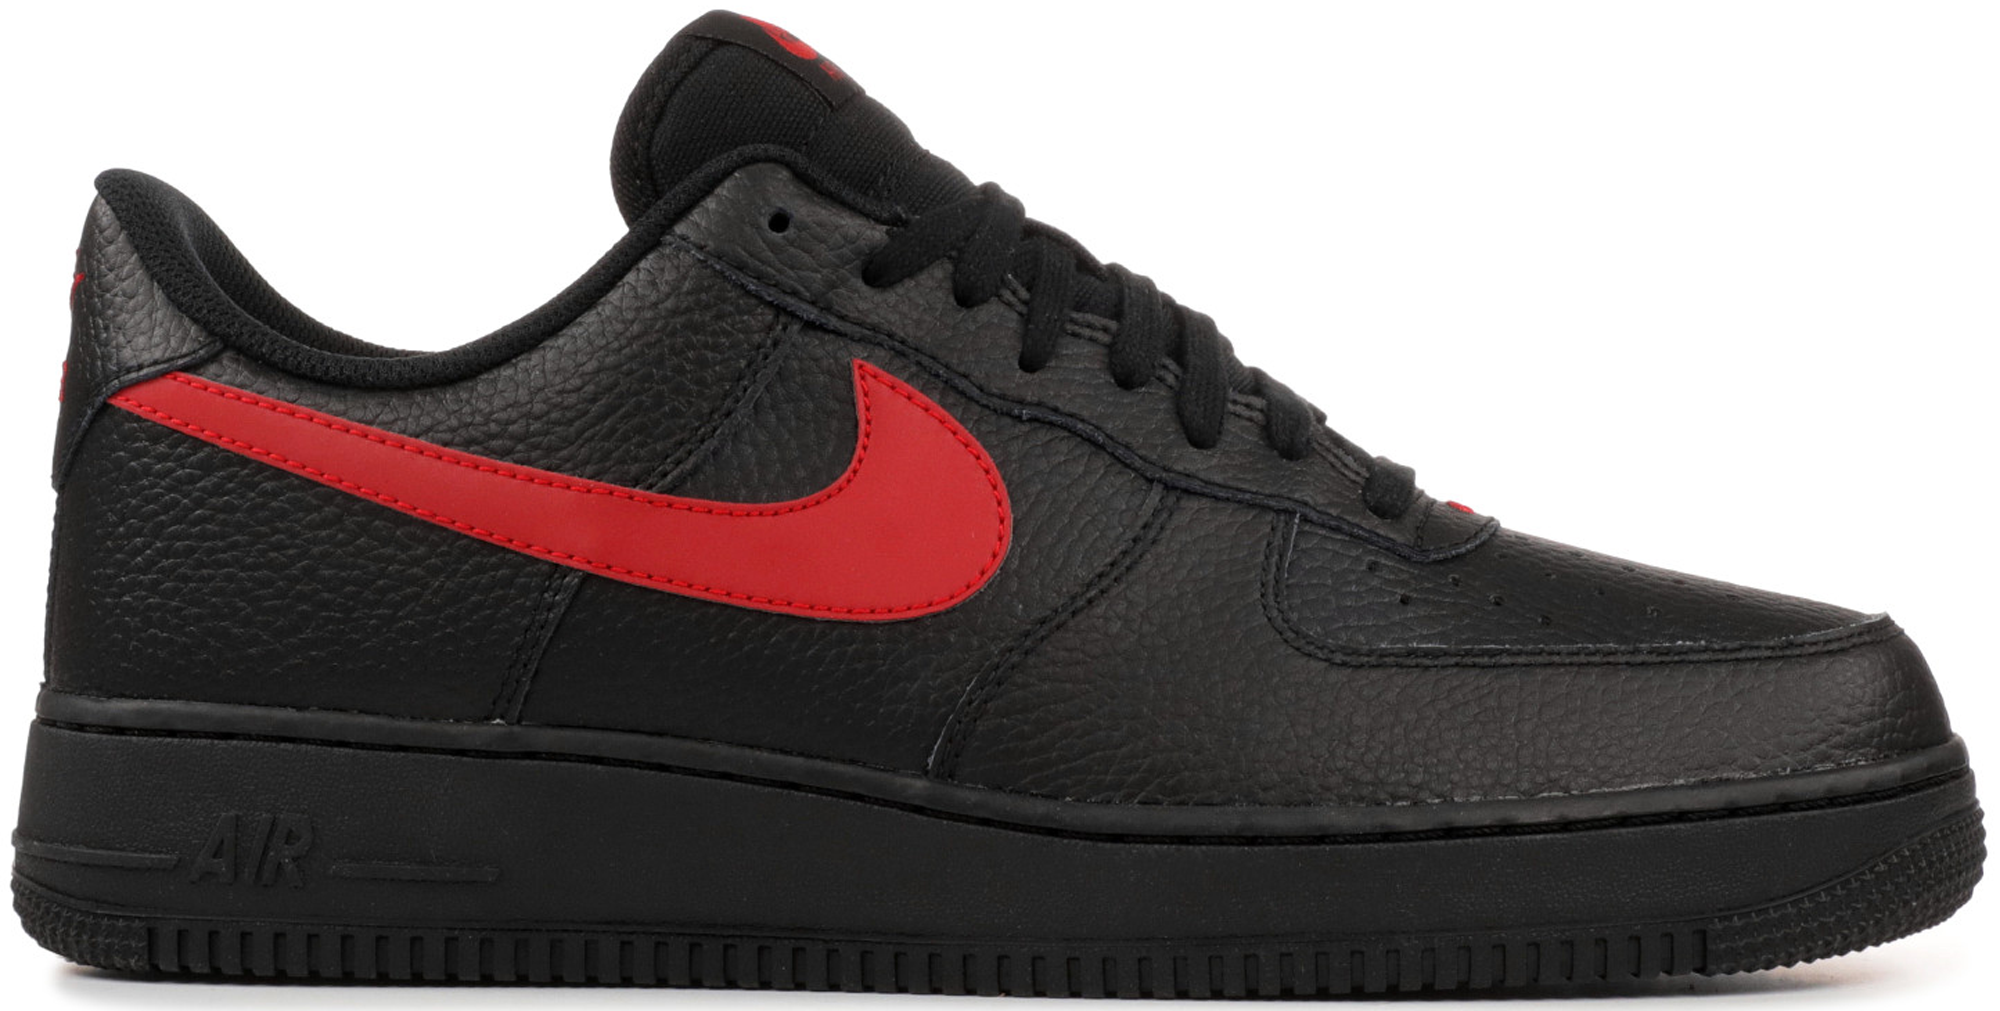 air force one red black